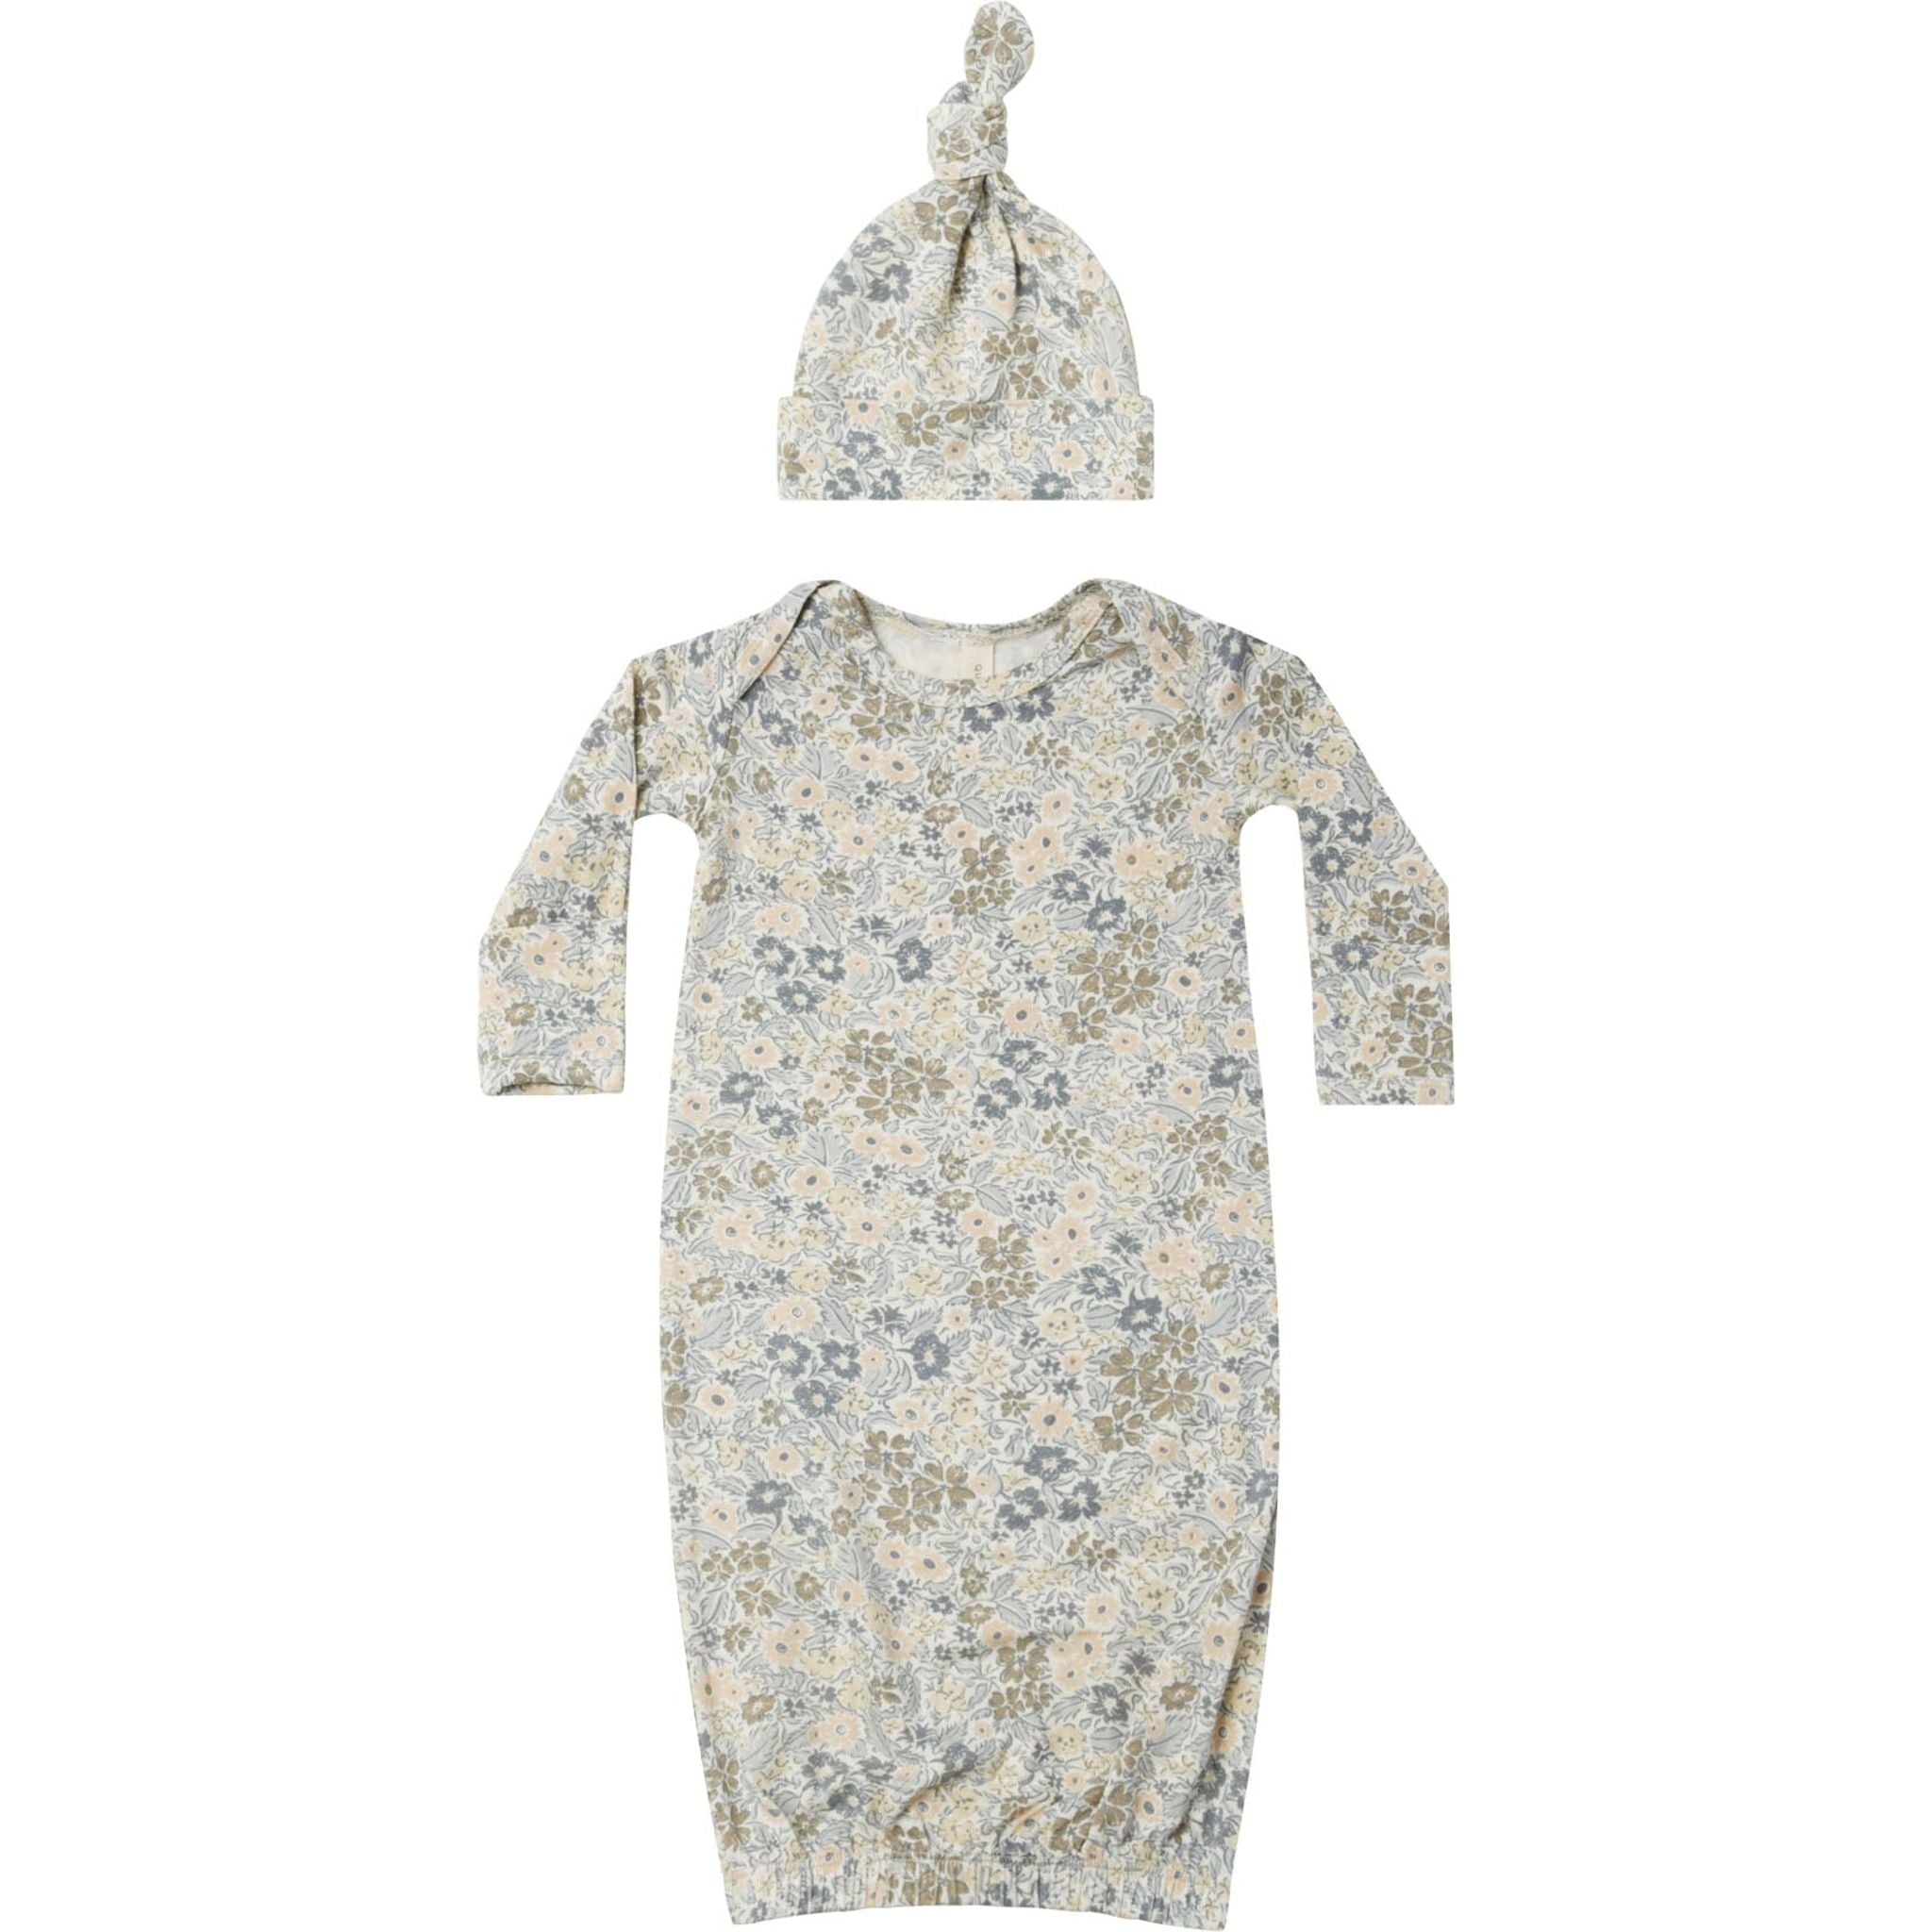 Knotted Baby Gown/Hat - Winter Garden